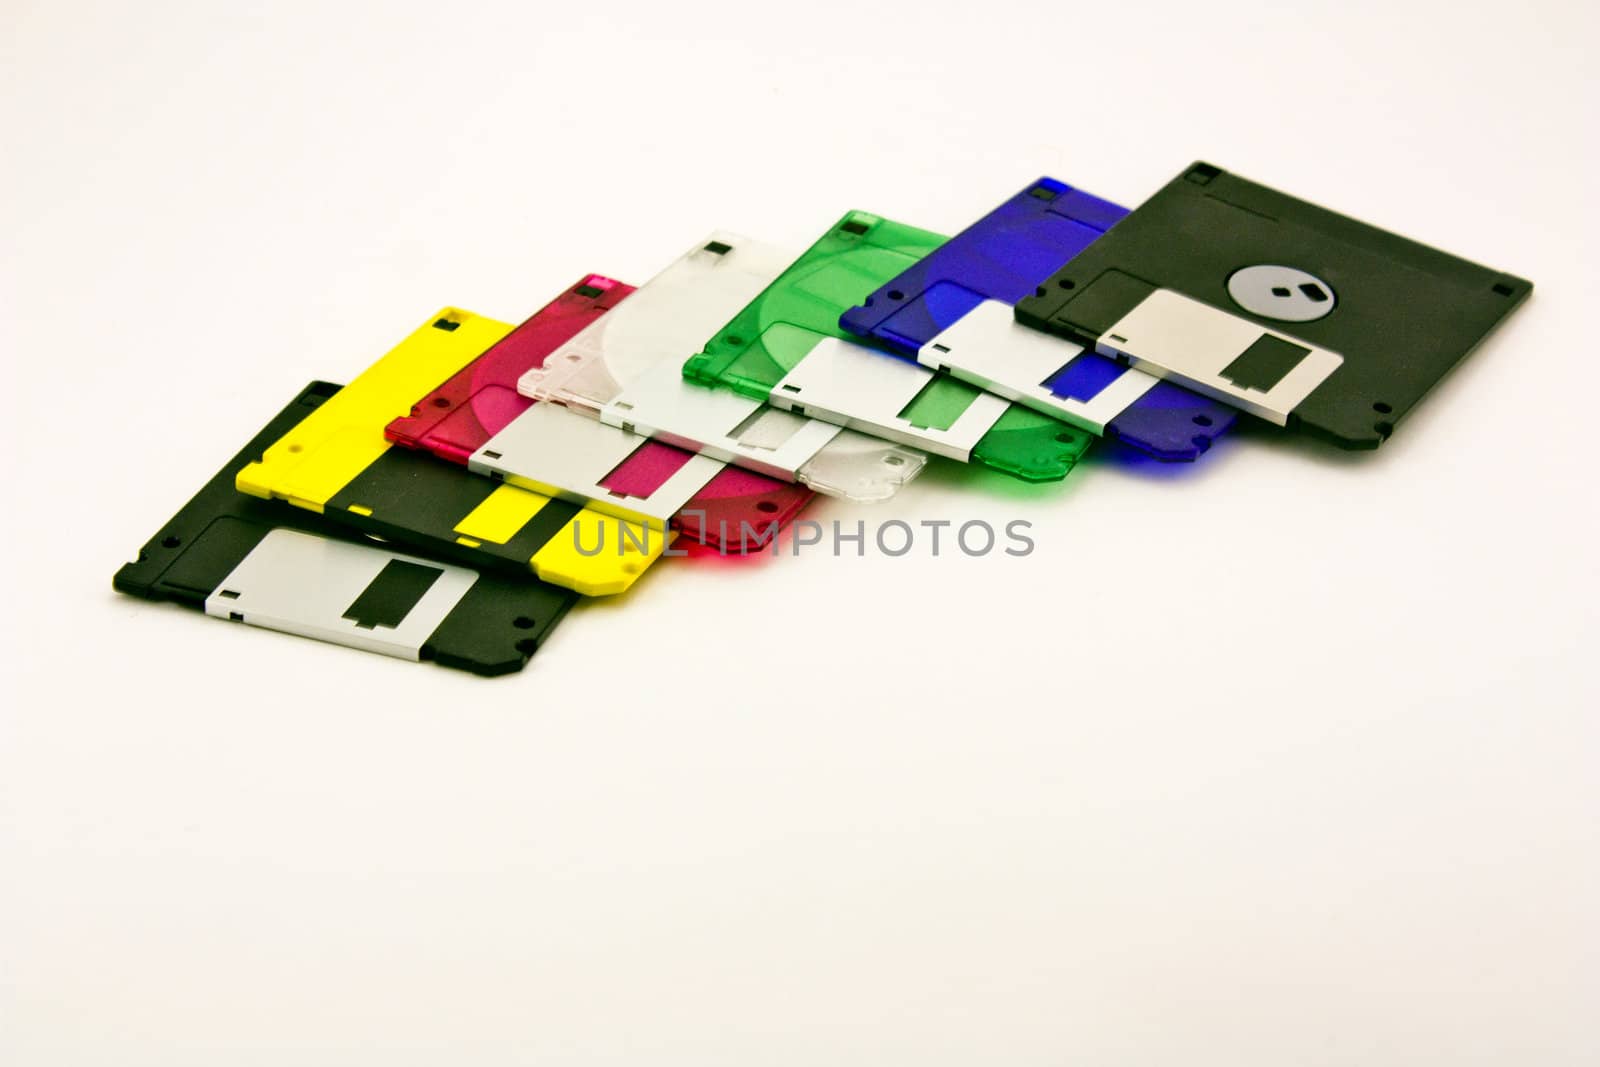 pile of floppy disks of different colors